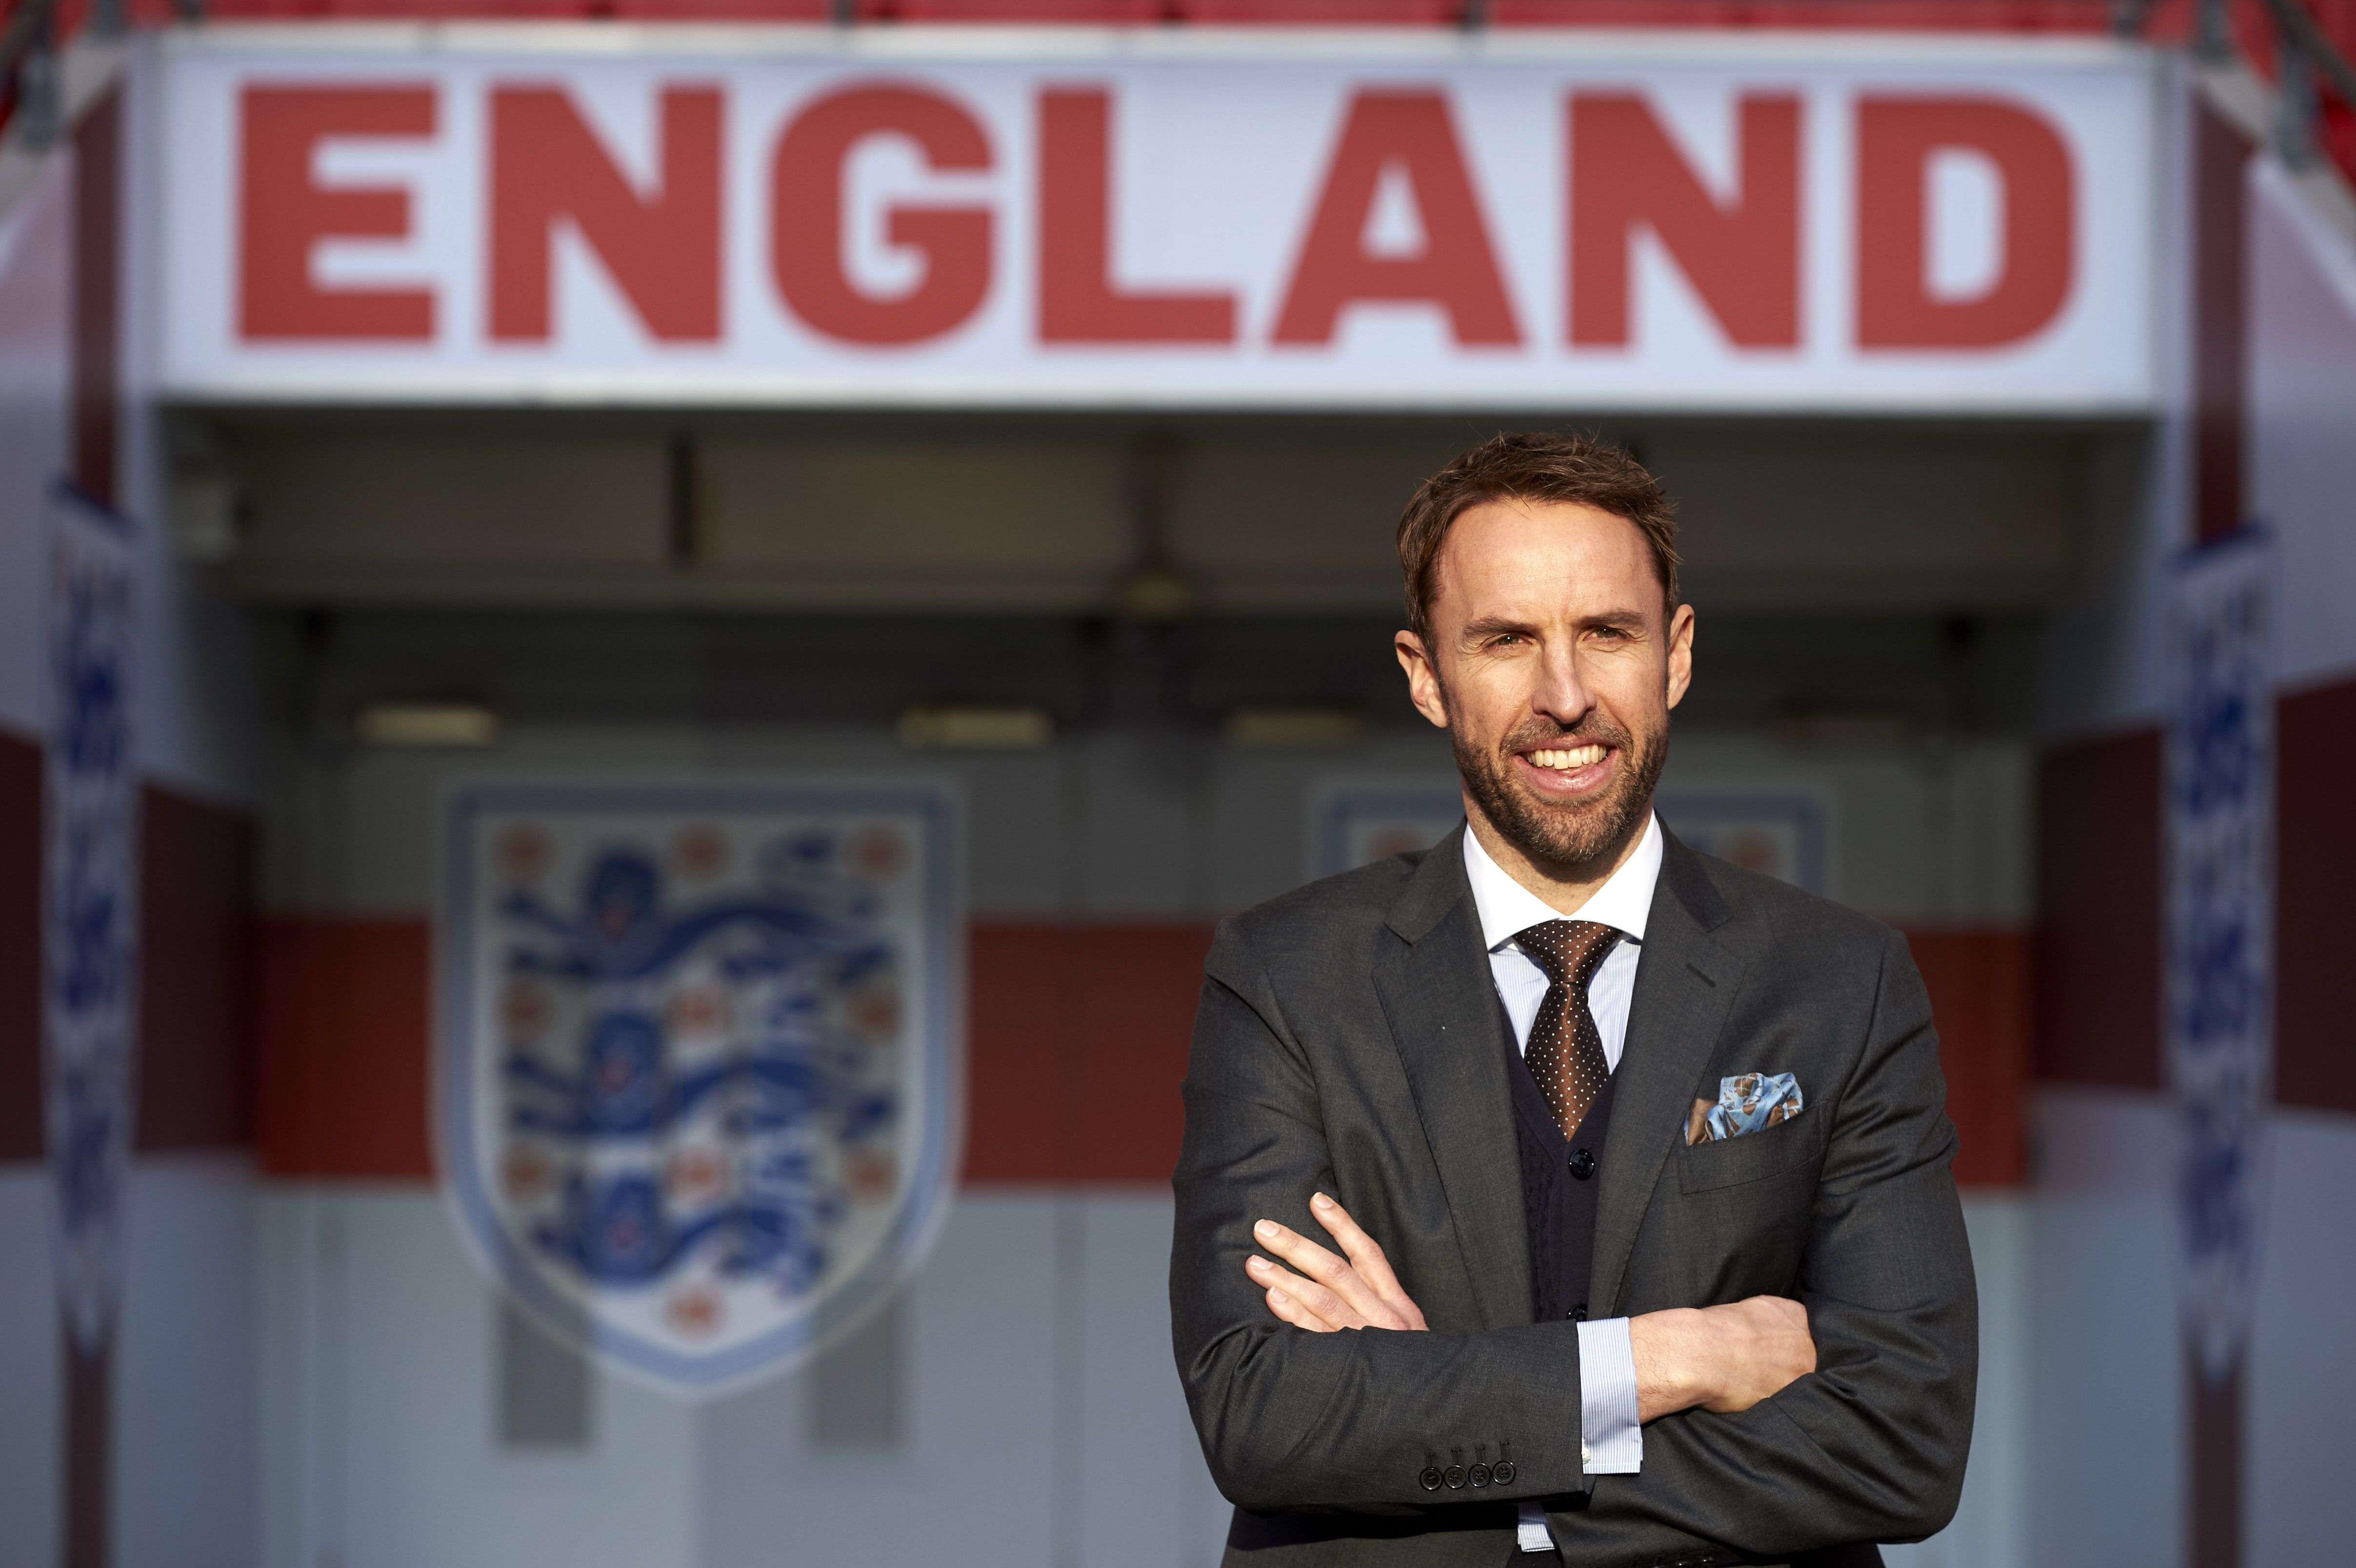 The England national team have been left in the hands of new coach Gareth Southgate, who was appointed permanent coach on December 1. Photo: AFP